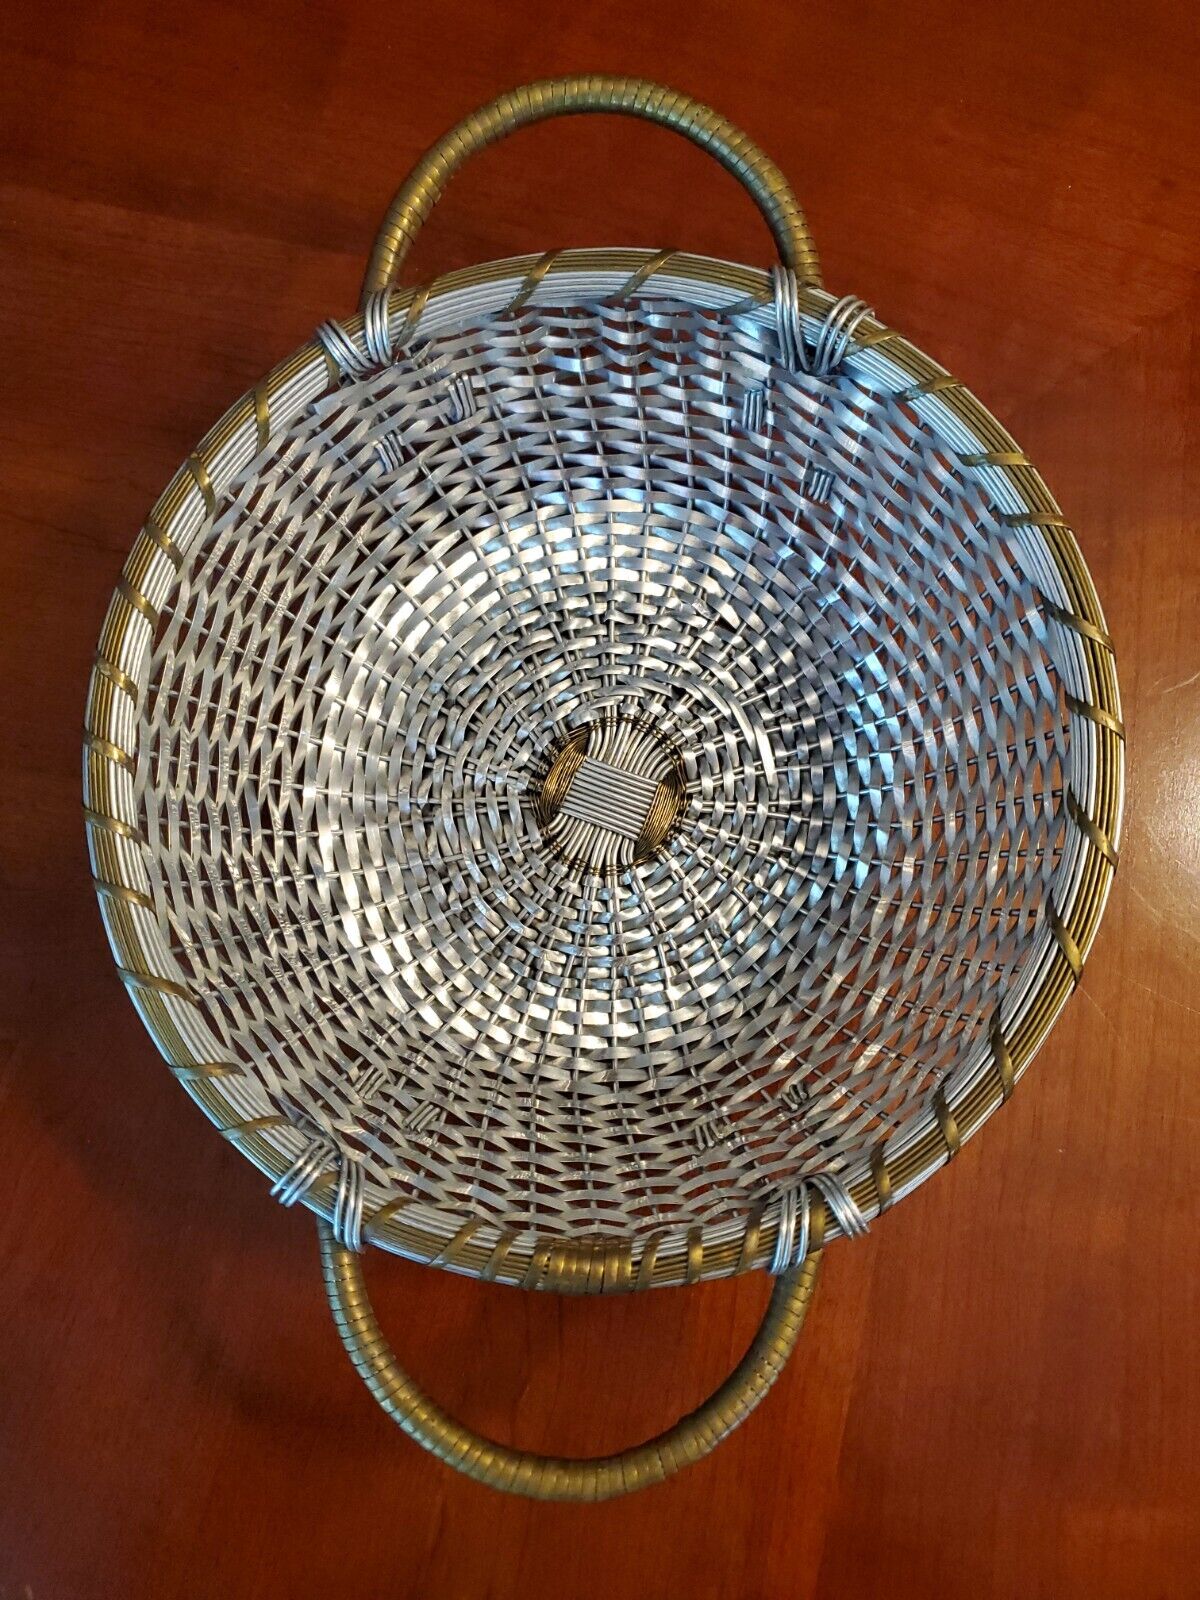 Metal Weaved Serving Basket Stainless Steel and Brass with Handles NICE